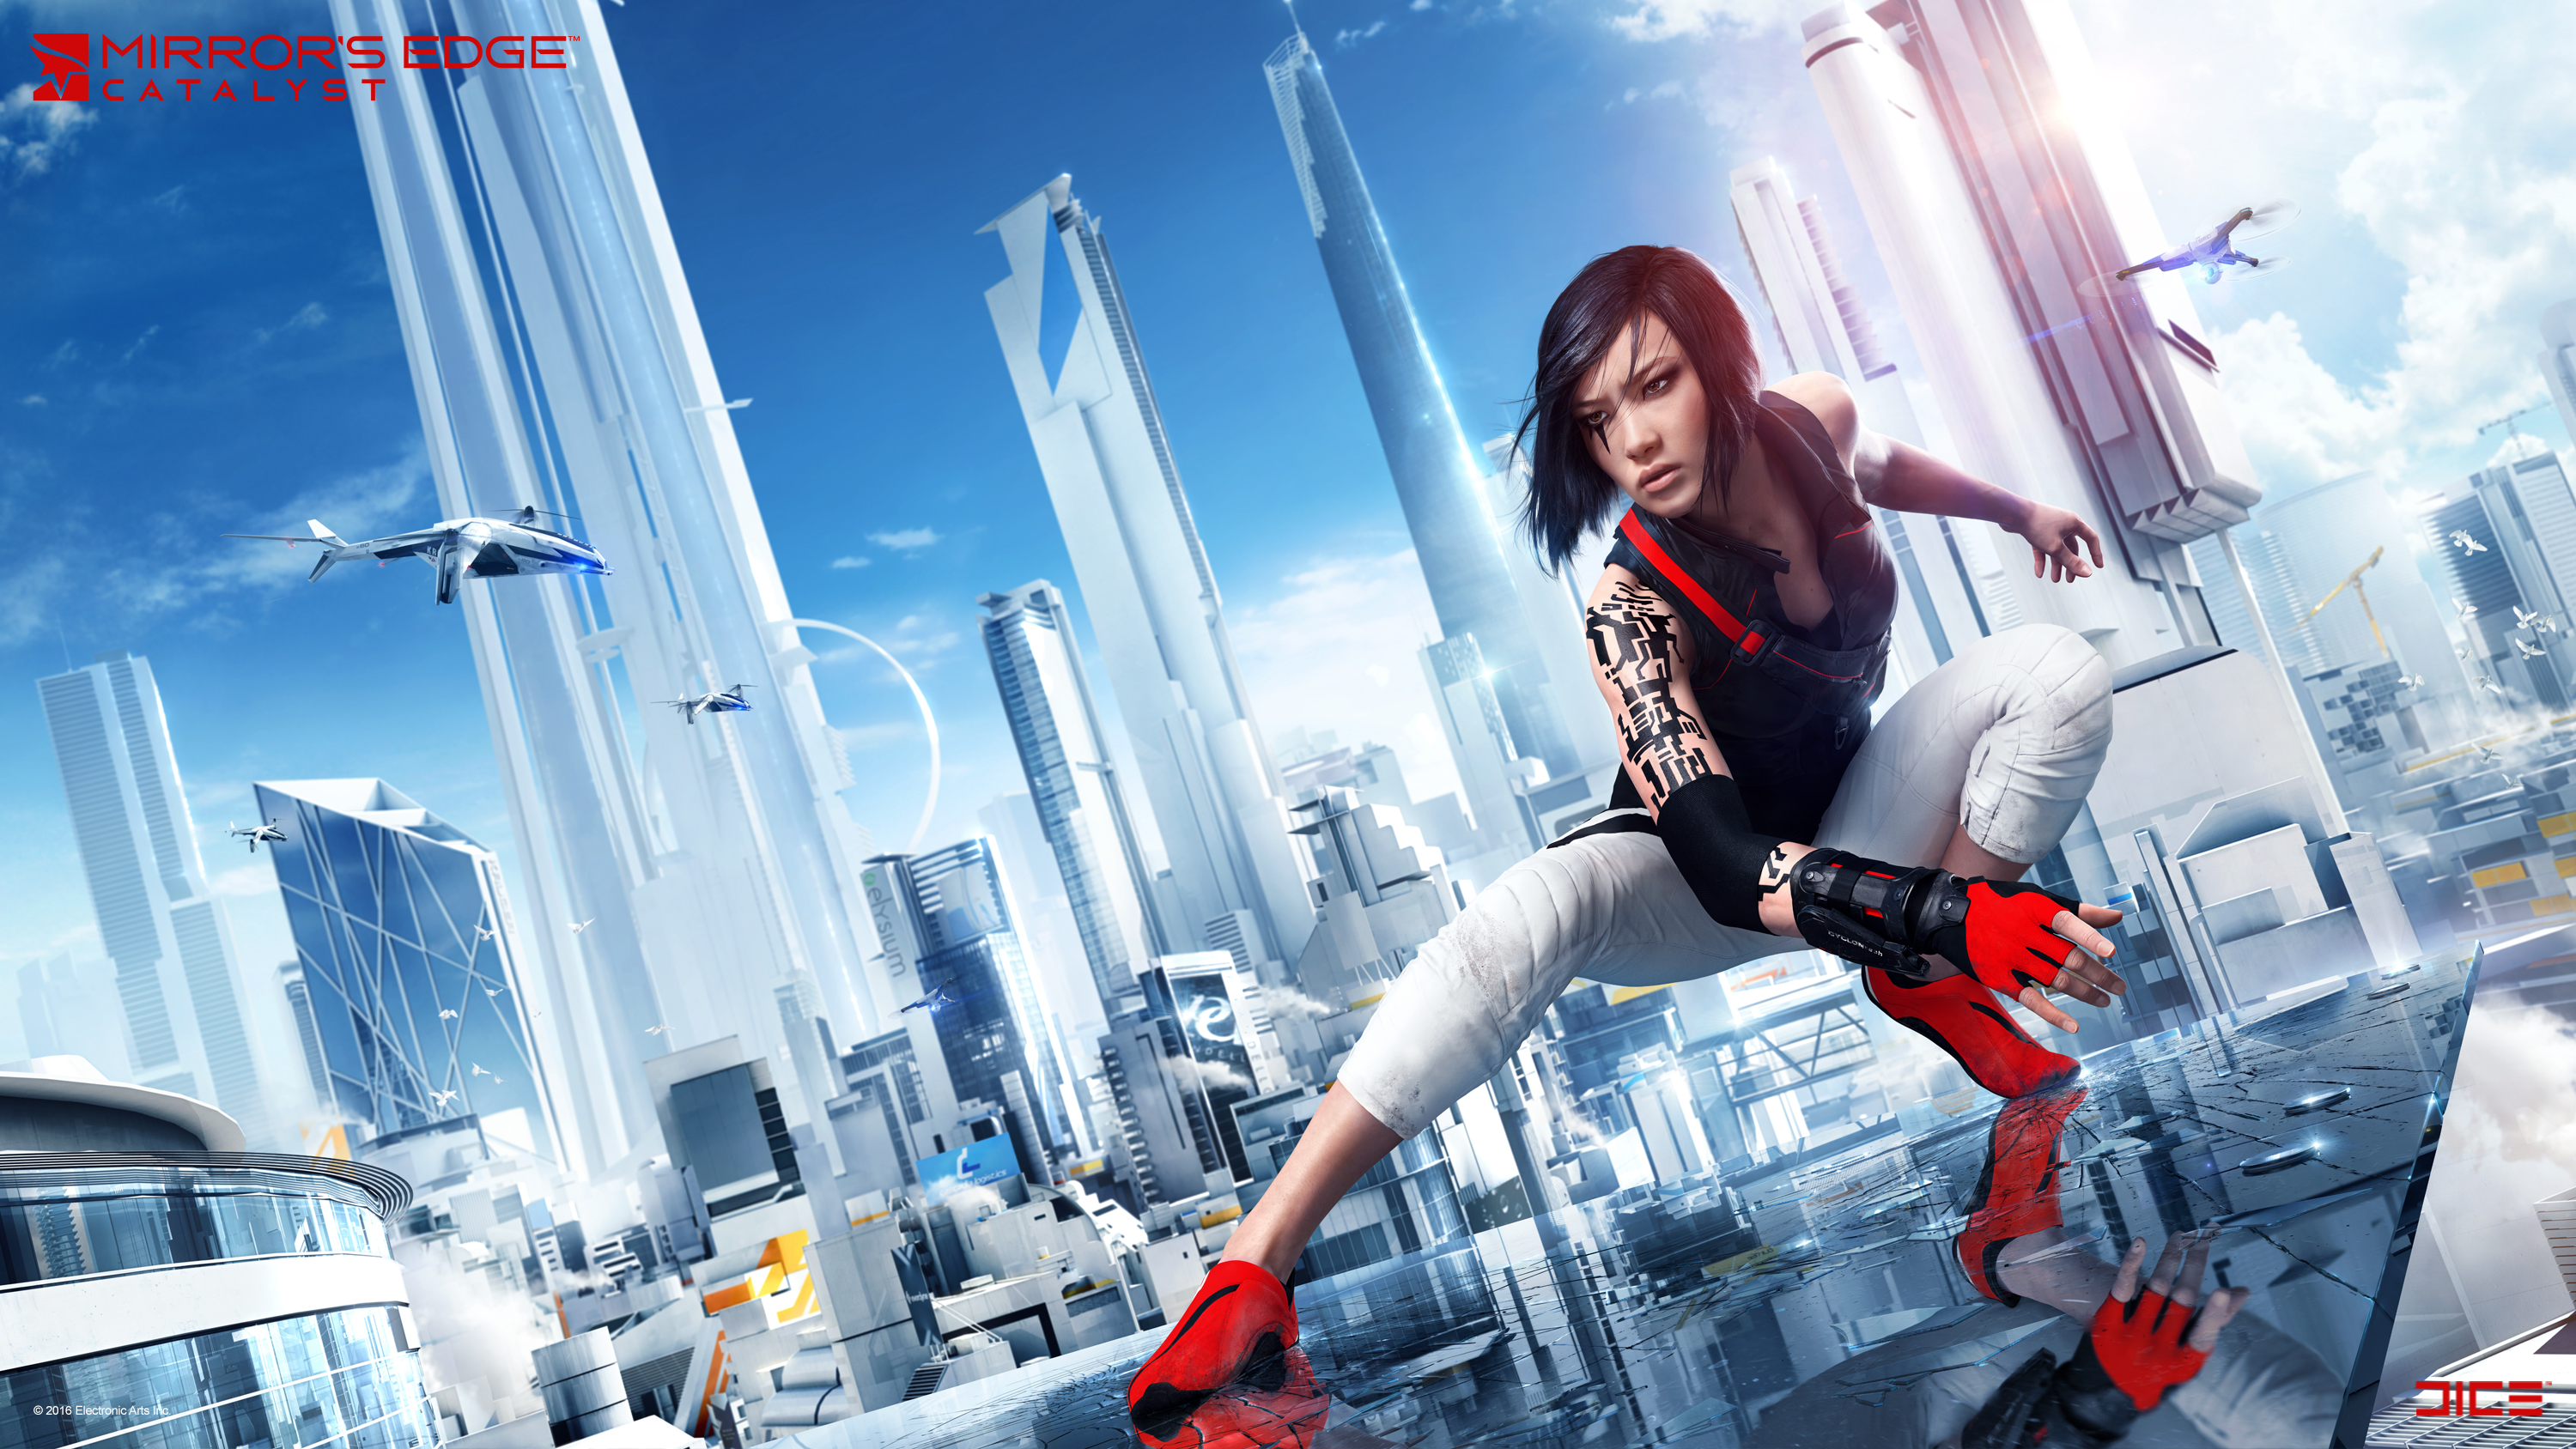 Mirrors edge hd papers and backgrounds